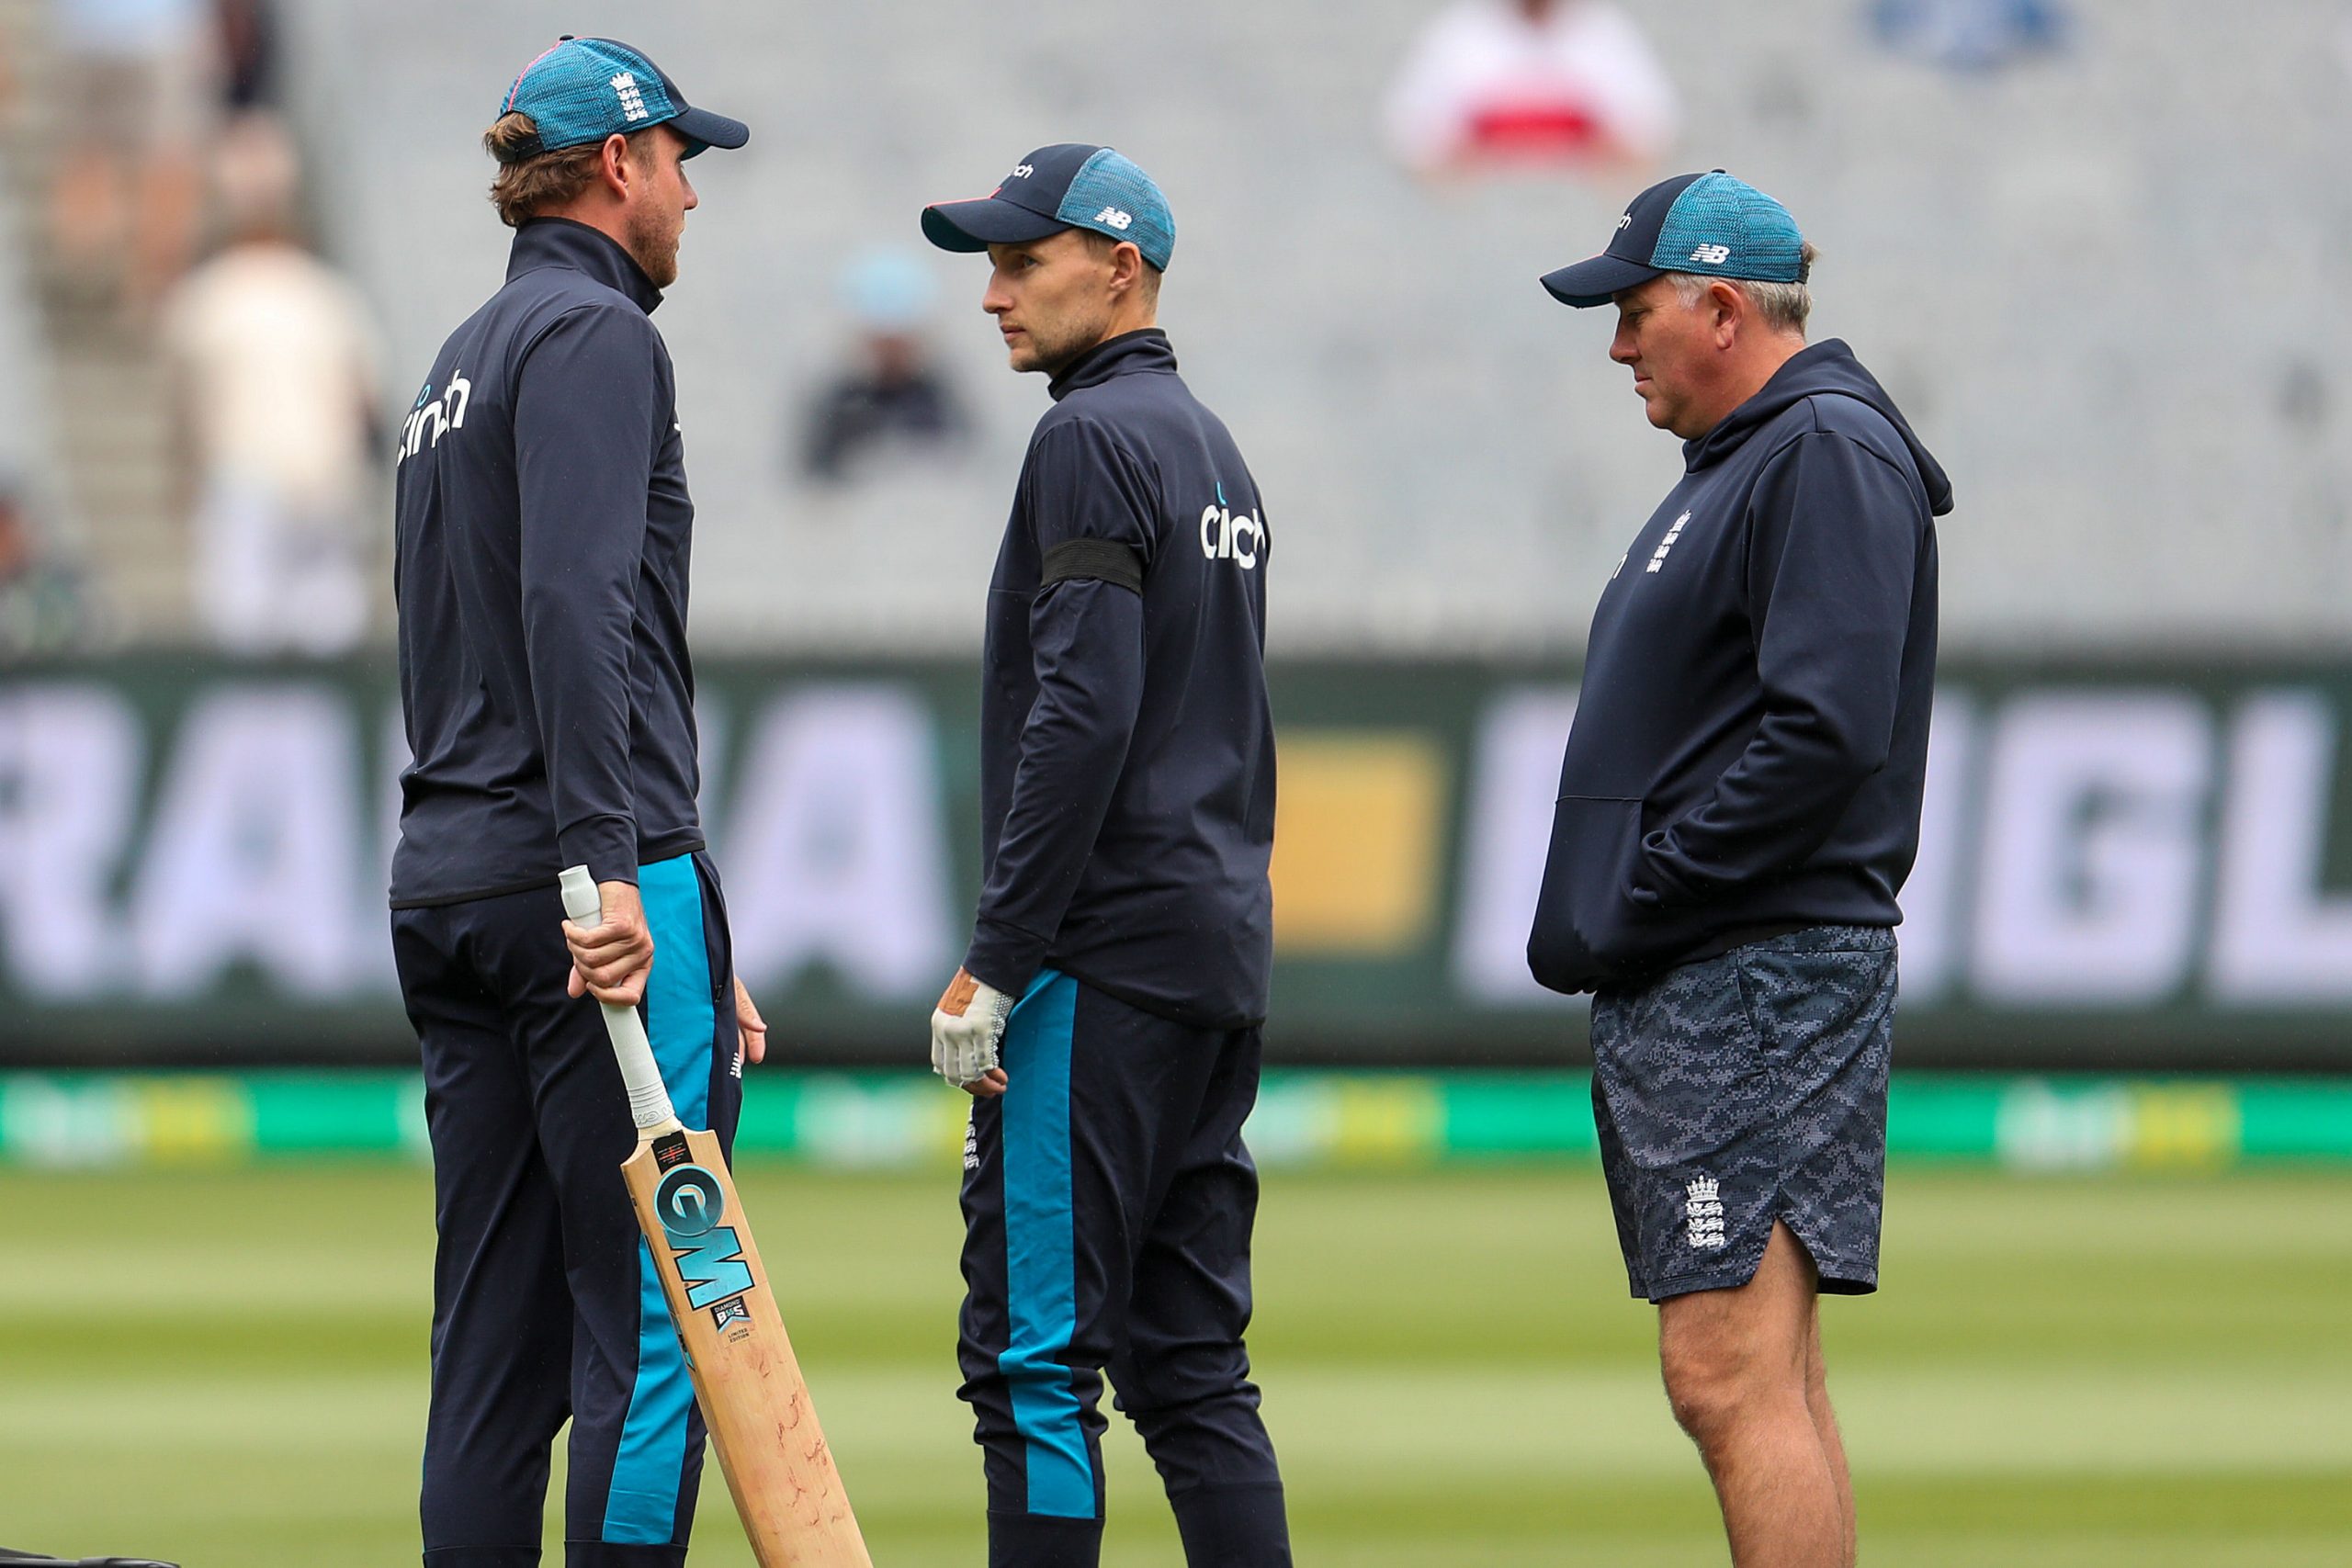 Ashes: Chris Silverwood, England men’s head coach, tests positive for COVID